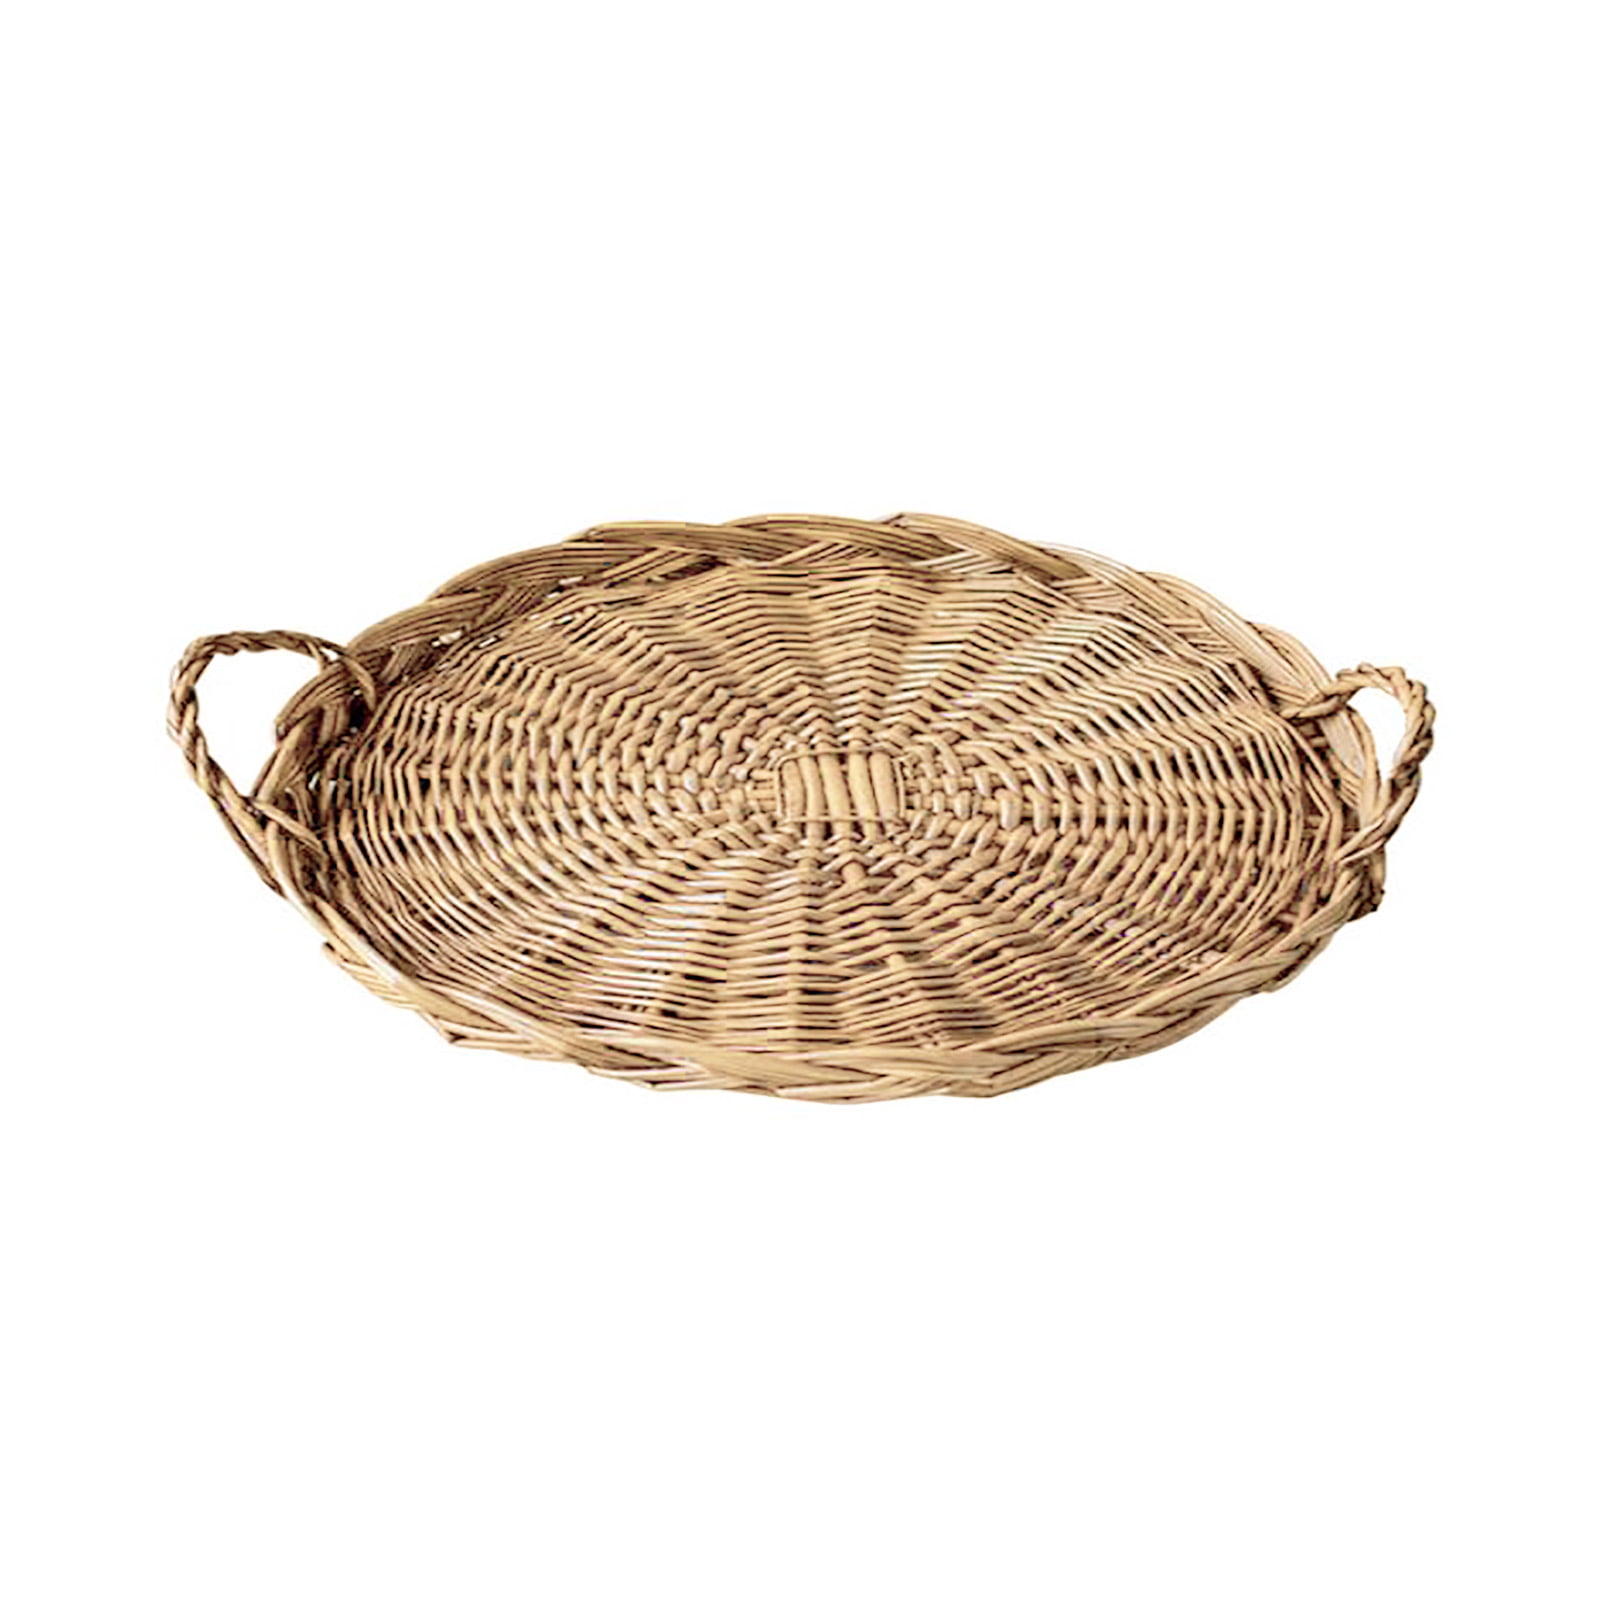 Fruit Dish Storage Basket Tray BreadTray Weave Round Hand-woven Vietnam Classic Food Pan